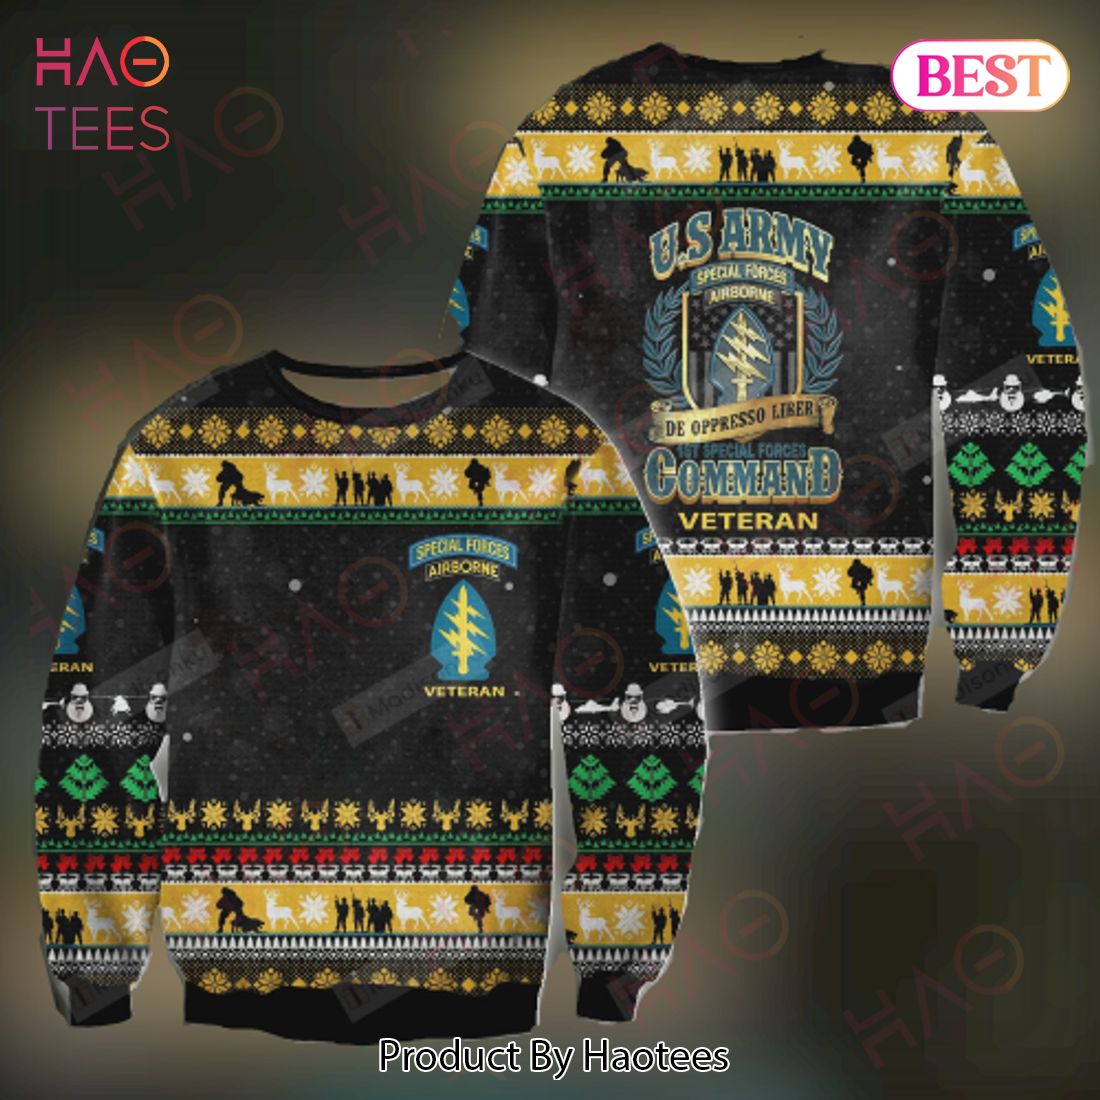 New Trending Collection from Haotees on 10/30/2022